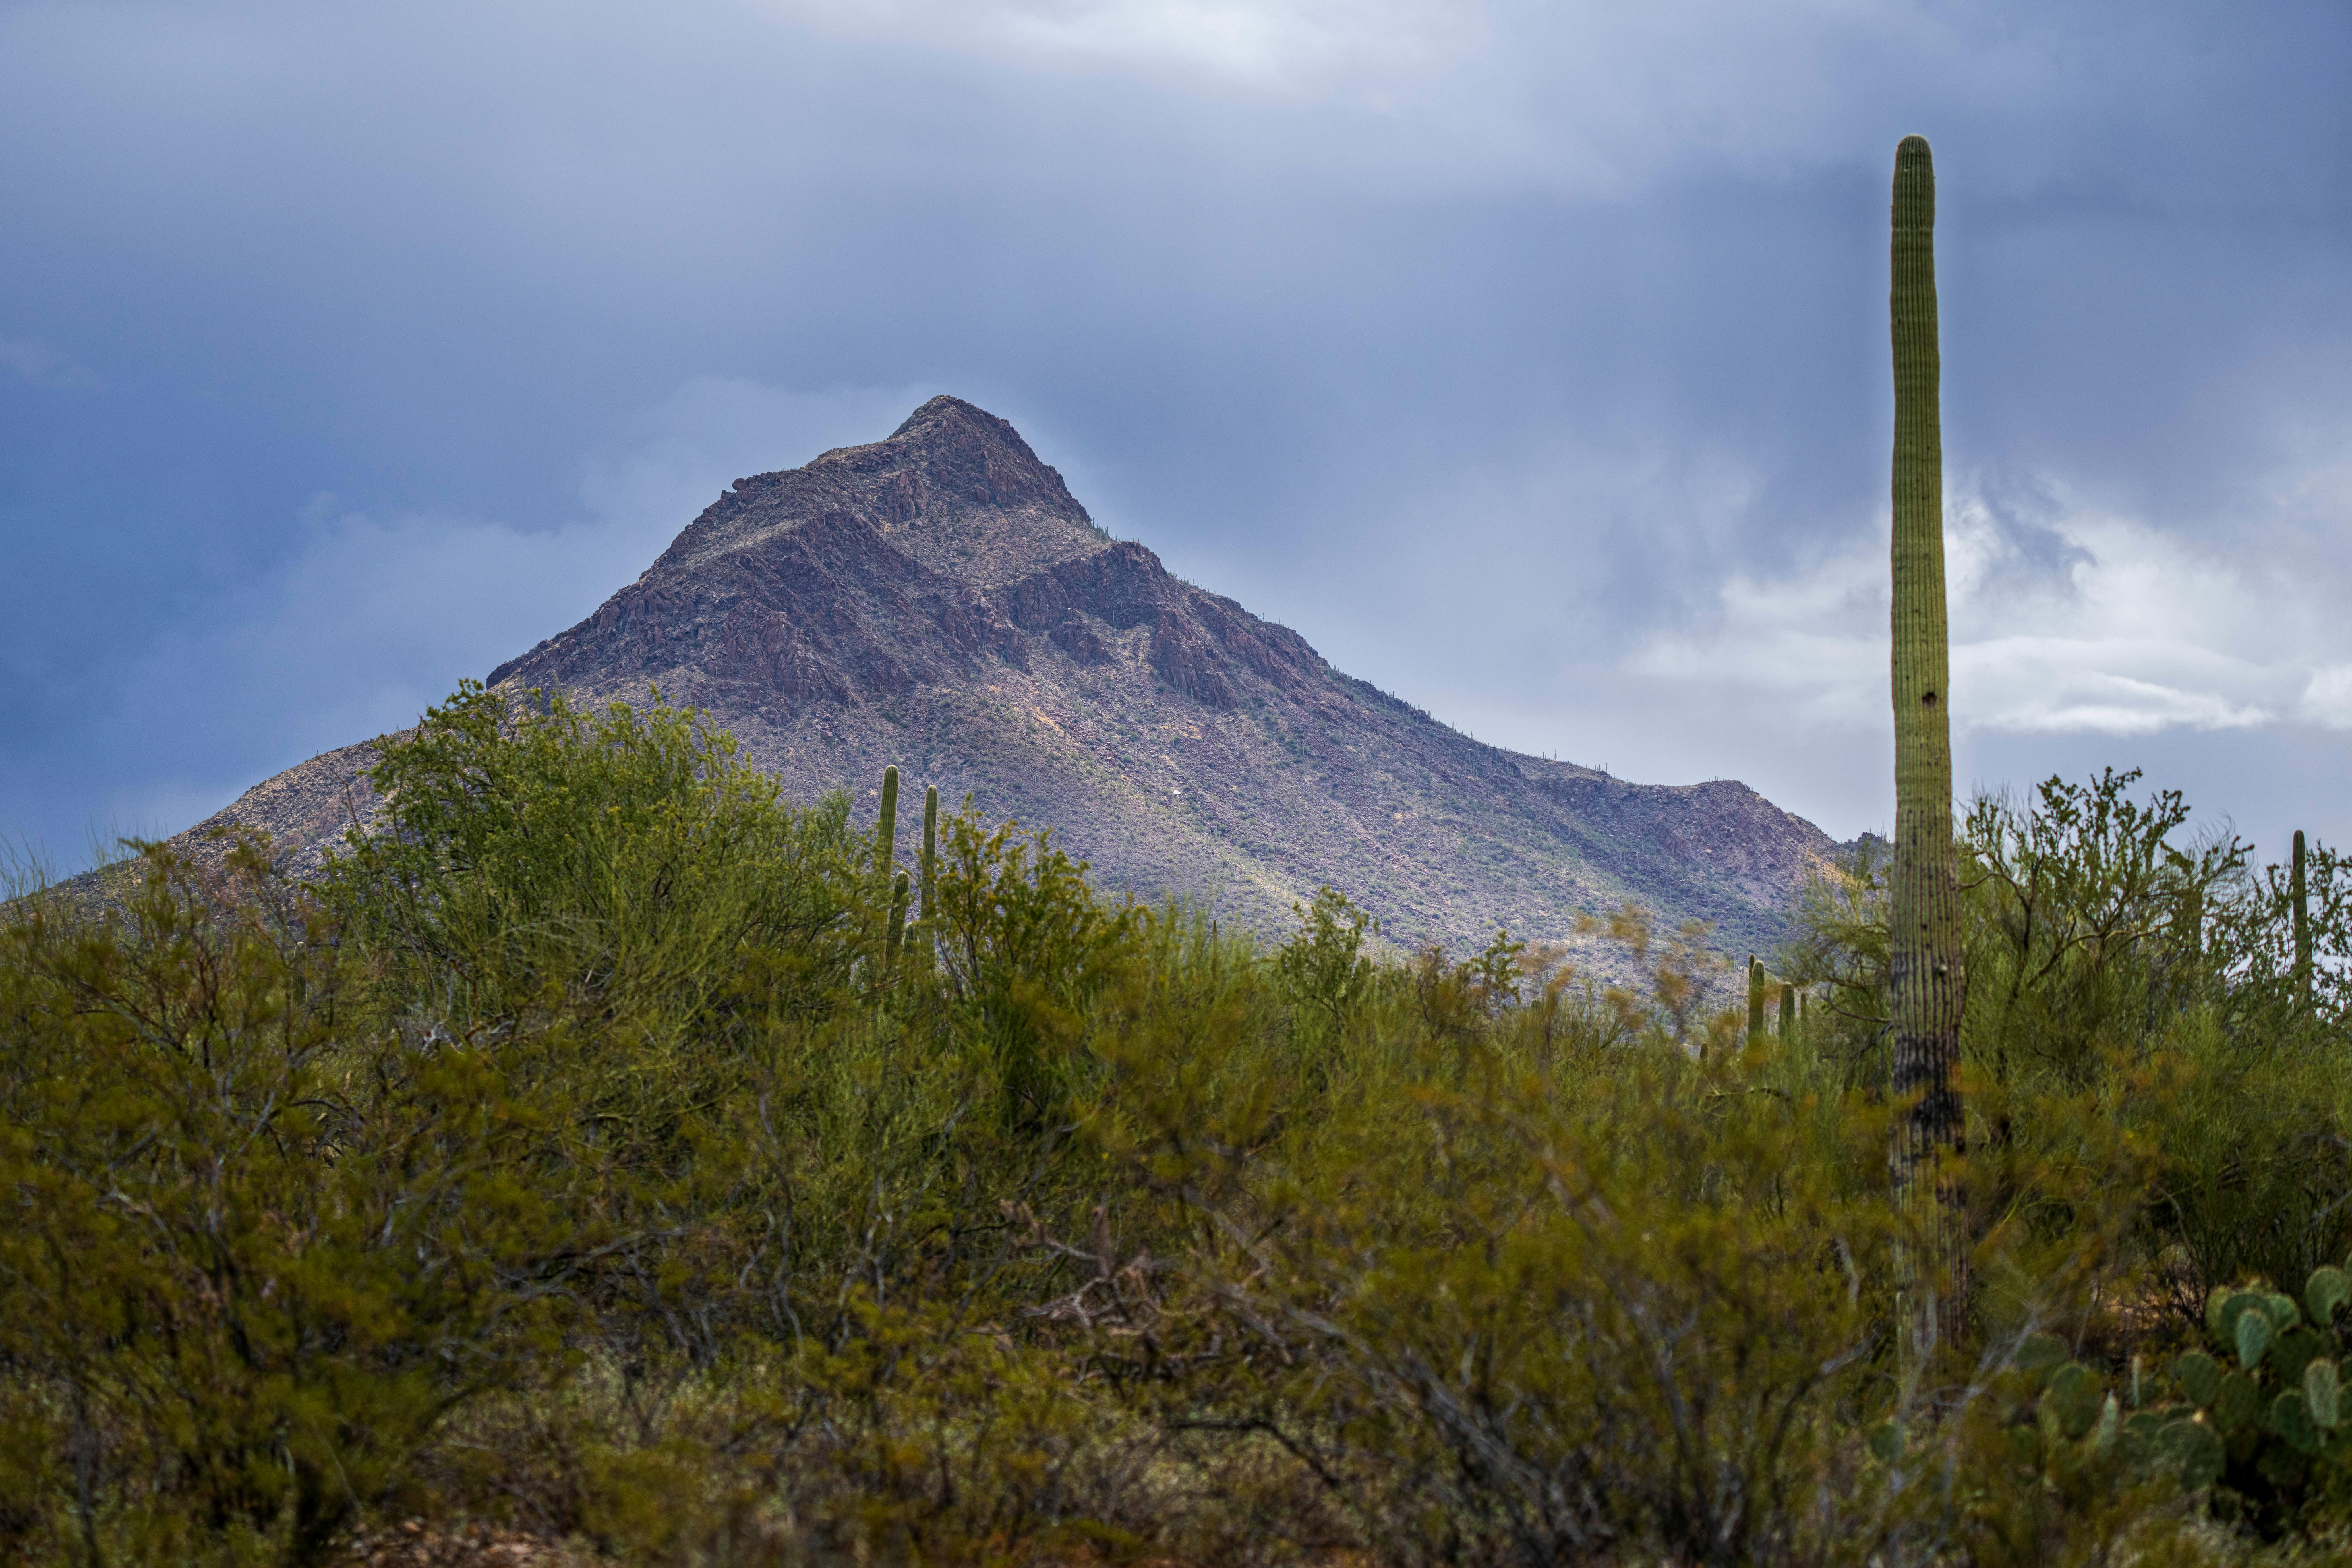 low angle shot of a mountain in saguaro national park